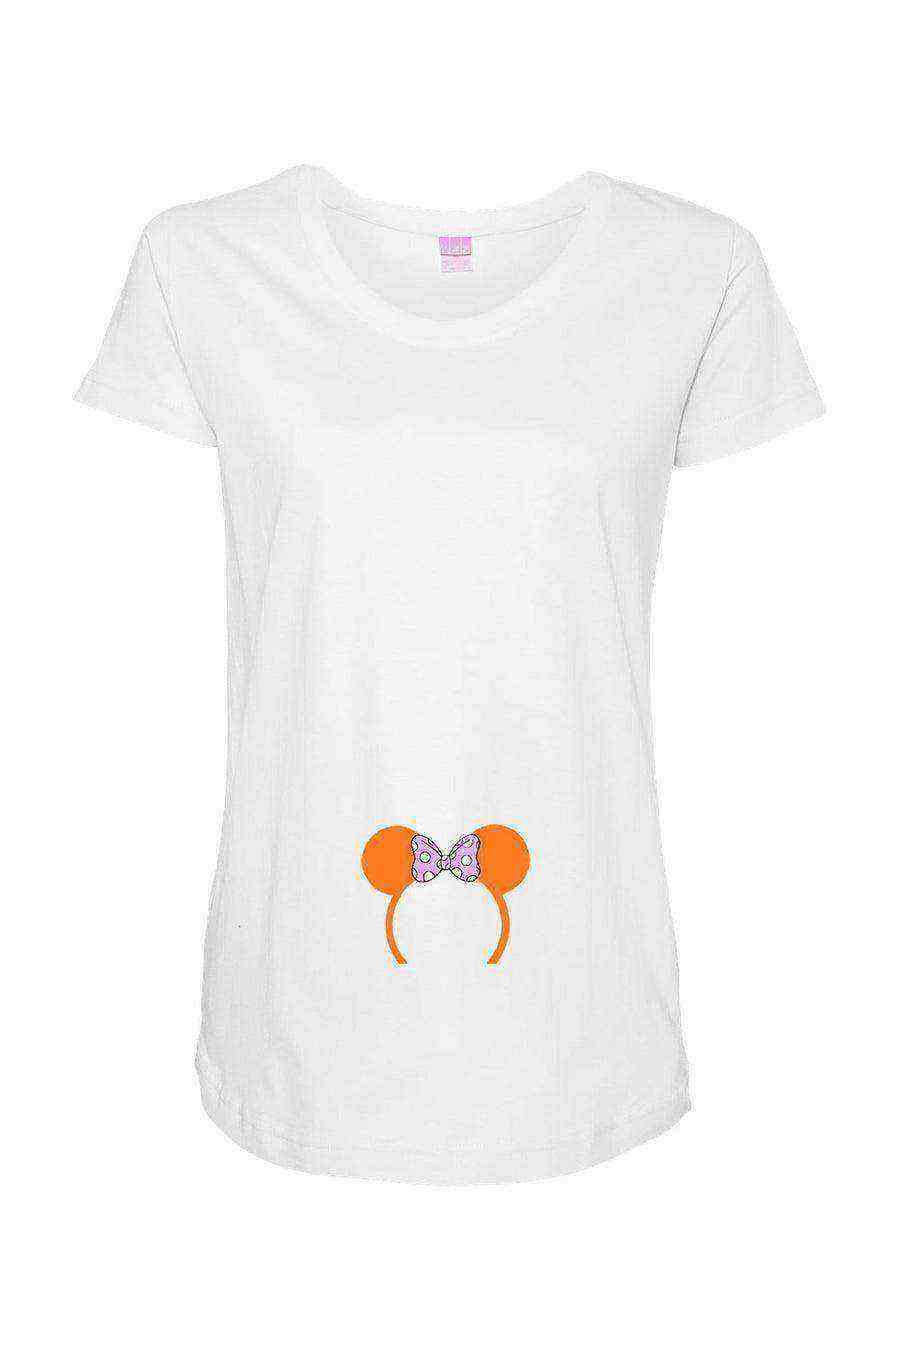 Babys first Trip (Figment Ears) Maternity Shirt - Dylan's Tees